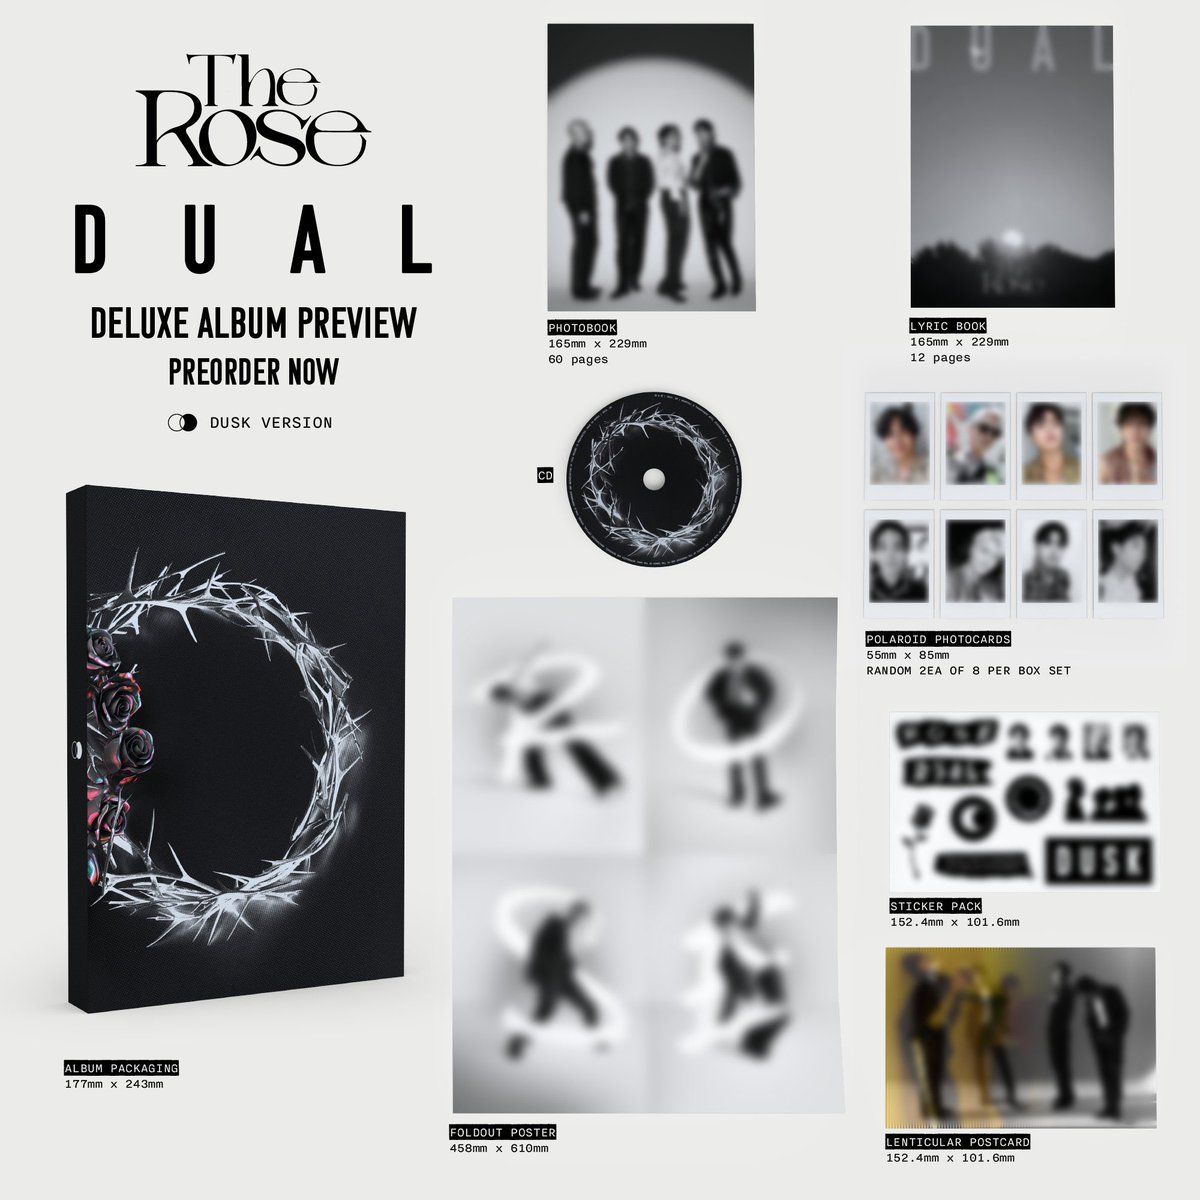 [DUAL] Physical Album Preorder Deluxe Album – Dusk Version Preorder Now: officialtherose.store/products/pre-o… More information: officialtherose.com/dual-album #TheRoseDUAL #TheRose #더로즈